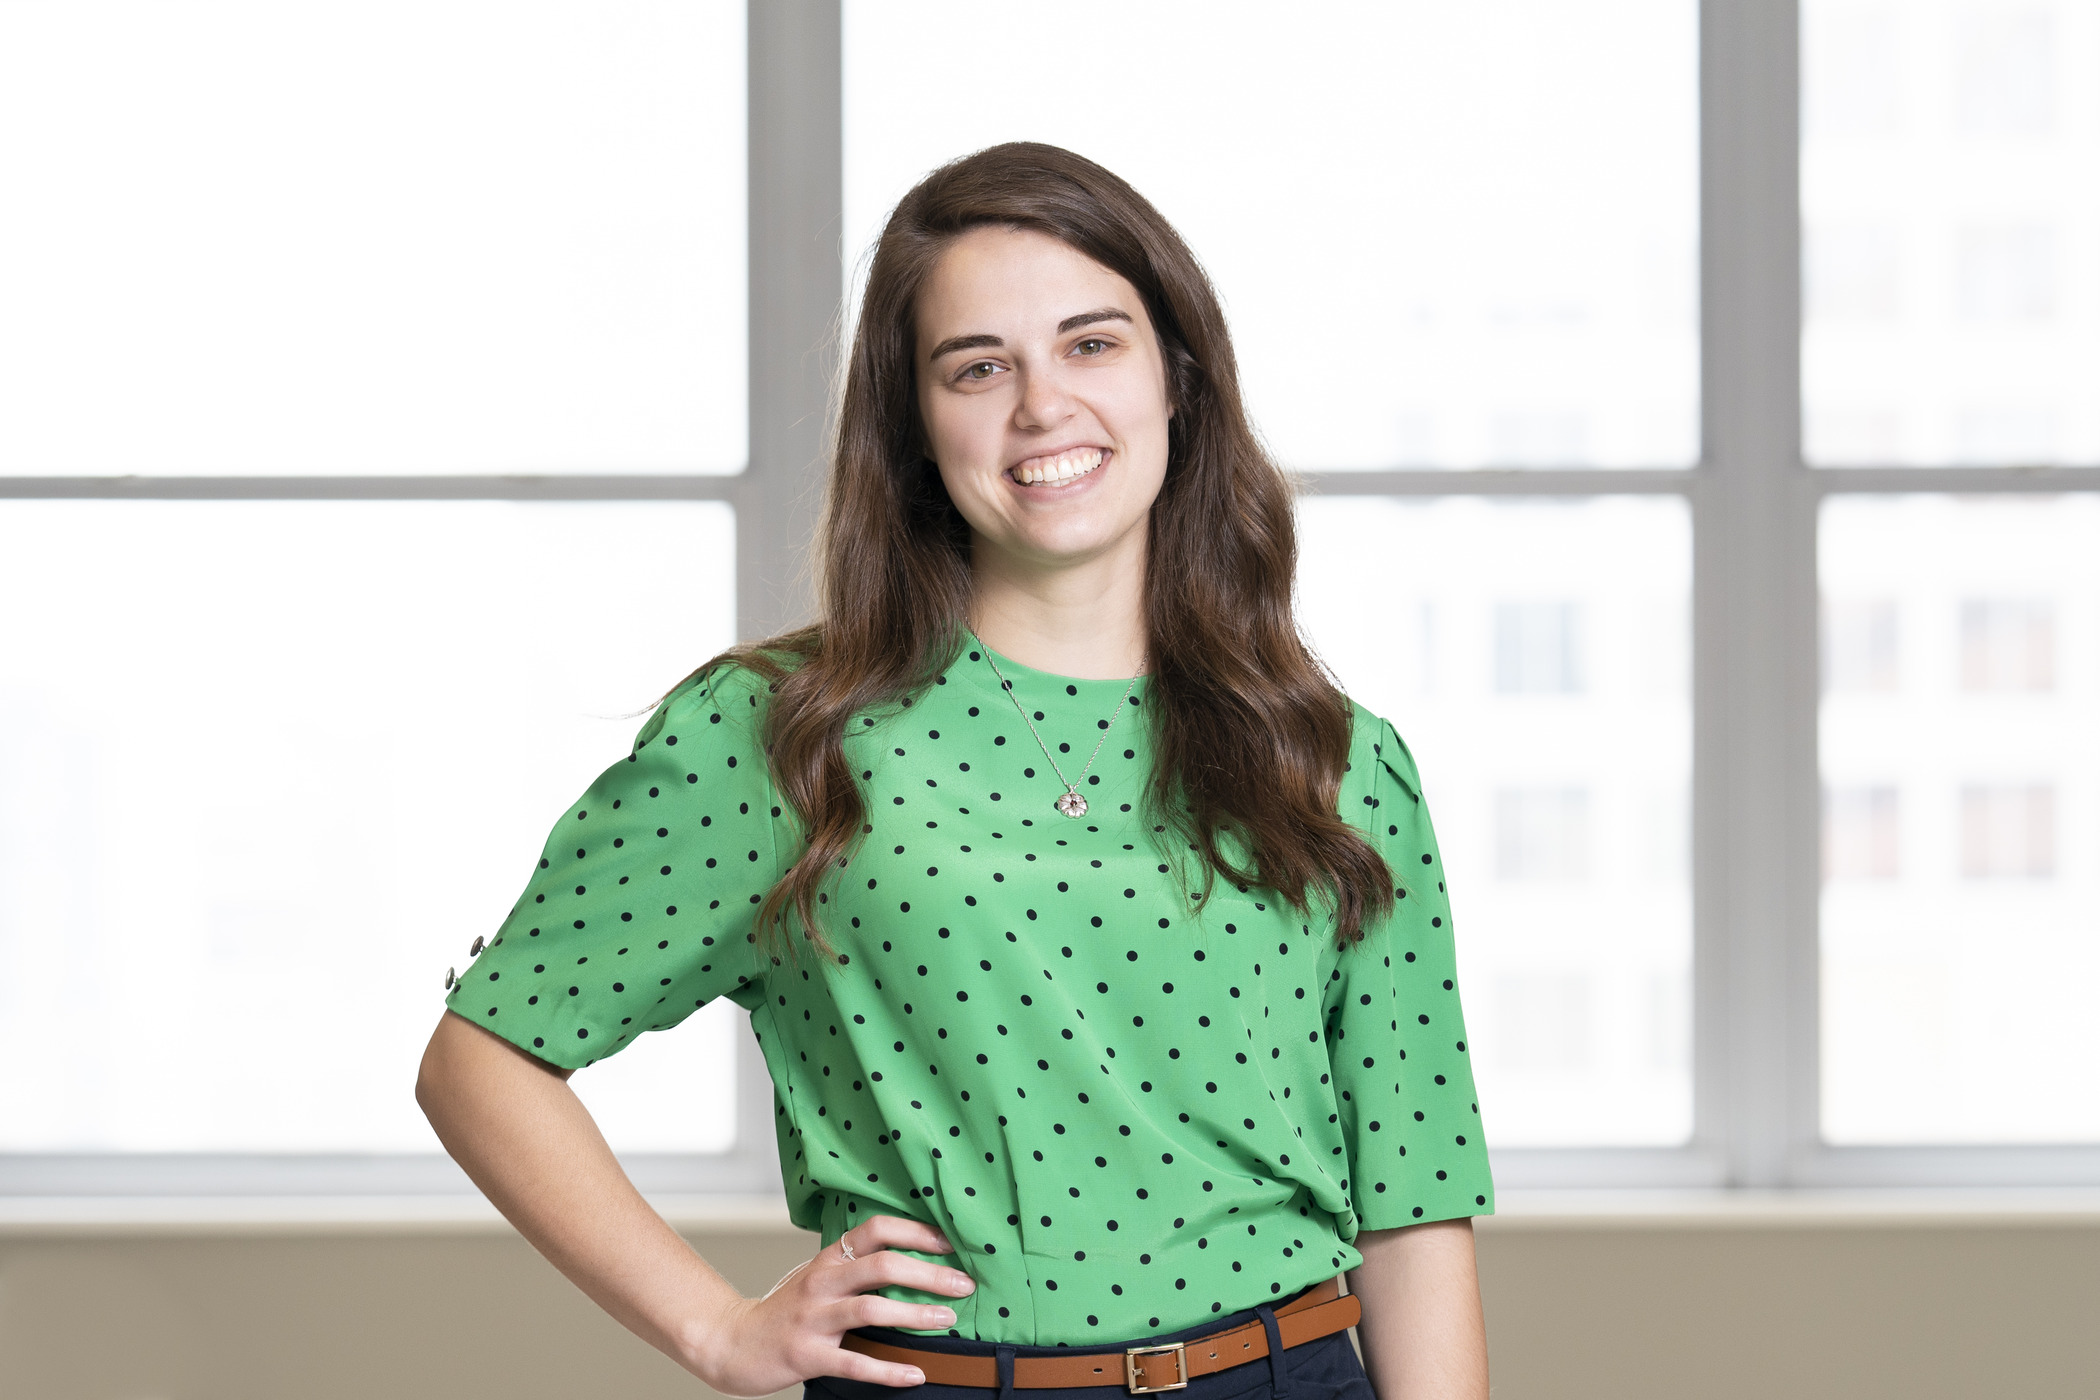 A young woman wearing a green shirt smiles in front of a series of bright windows